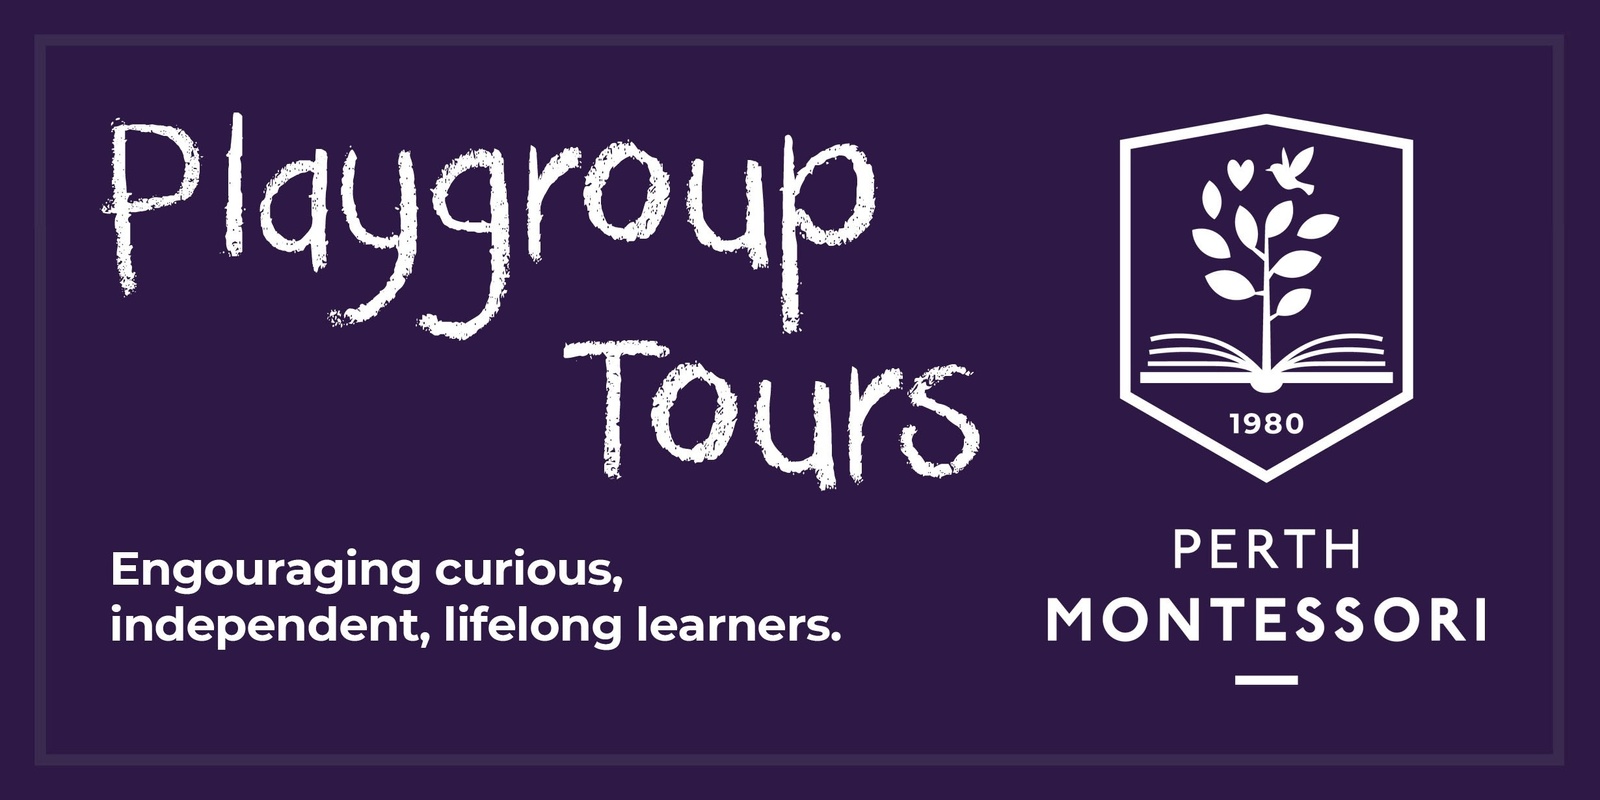 Banner image for Perth Montessori Playgroup Tours (0-3 years of age)